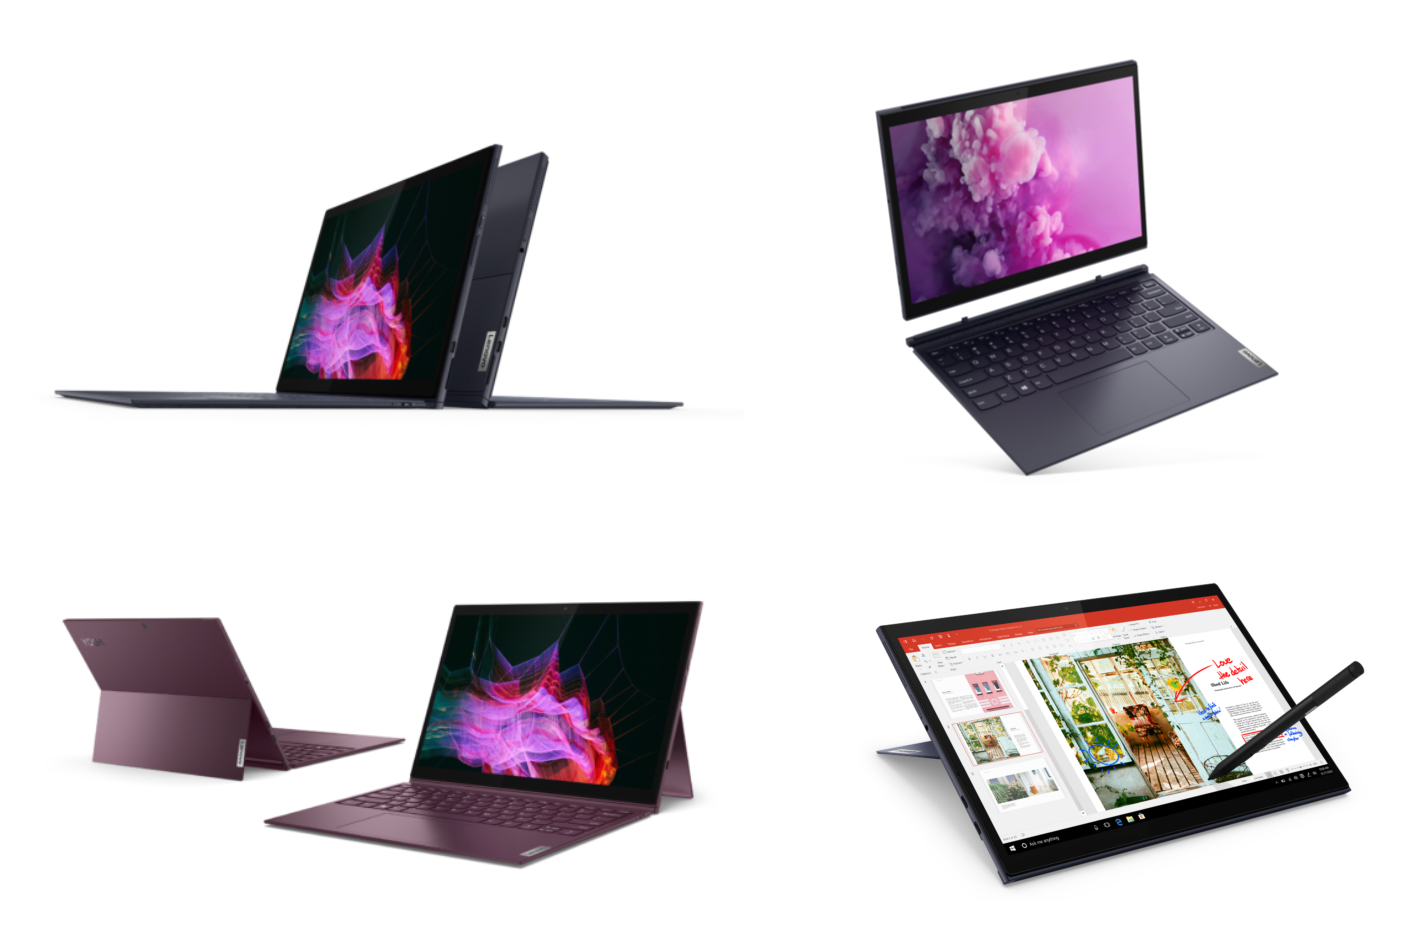 Lenovo's latest Windows 10 tablets arrive with detachable keyboards